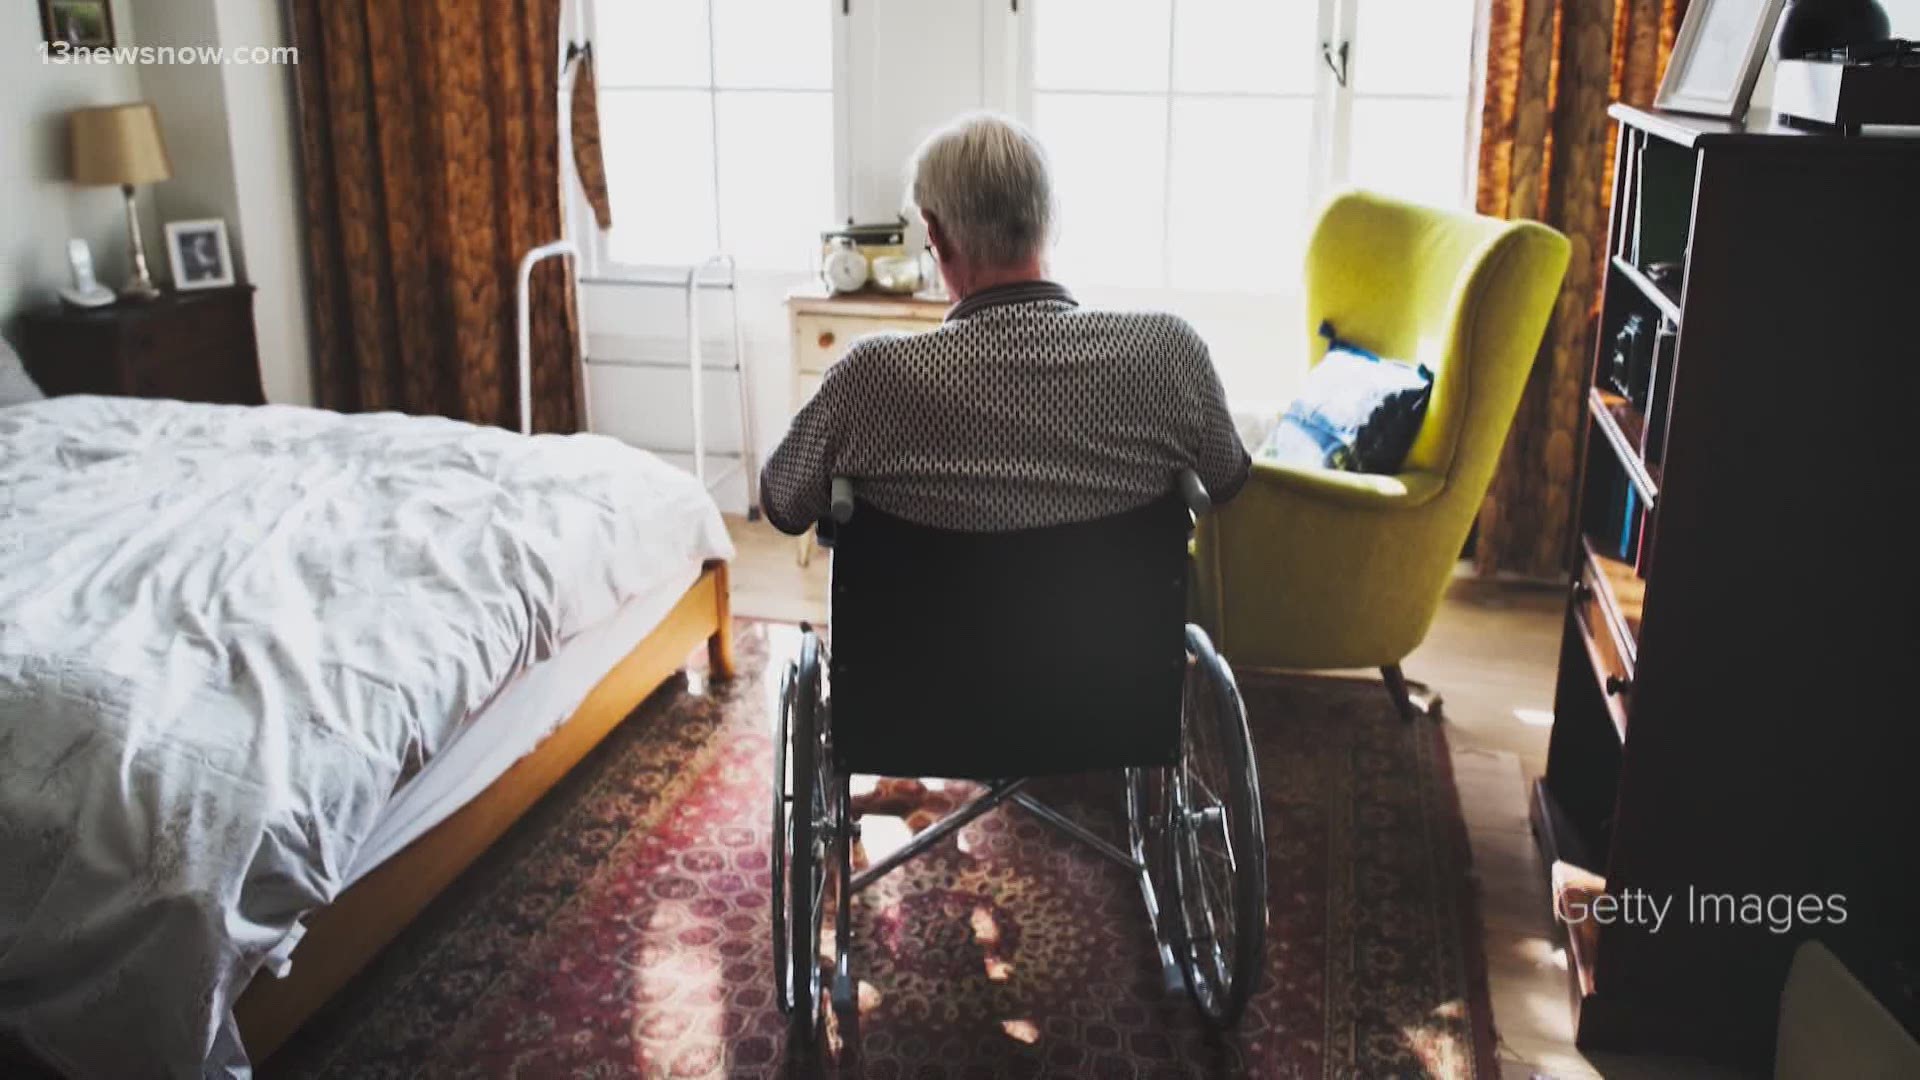 The policy change came after months of lockdowns at long-term care facilities. It relaxes restrictions, even as coronavirus (COVID-19) cases continue to climb.